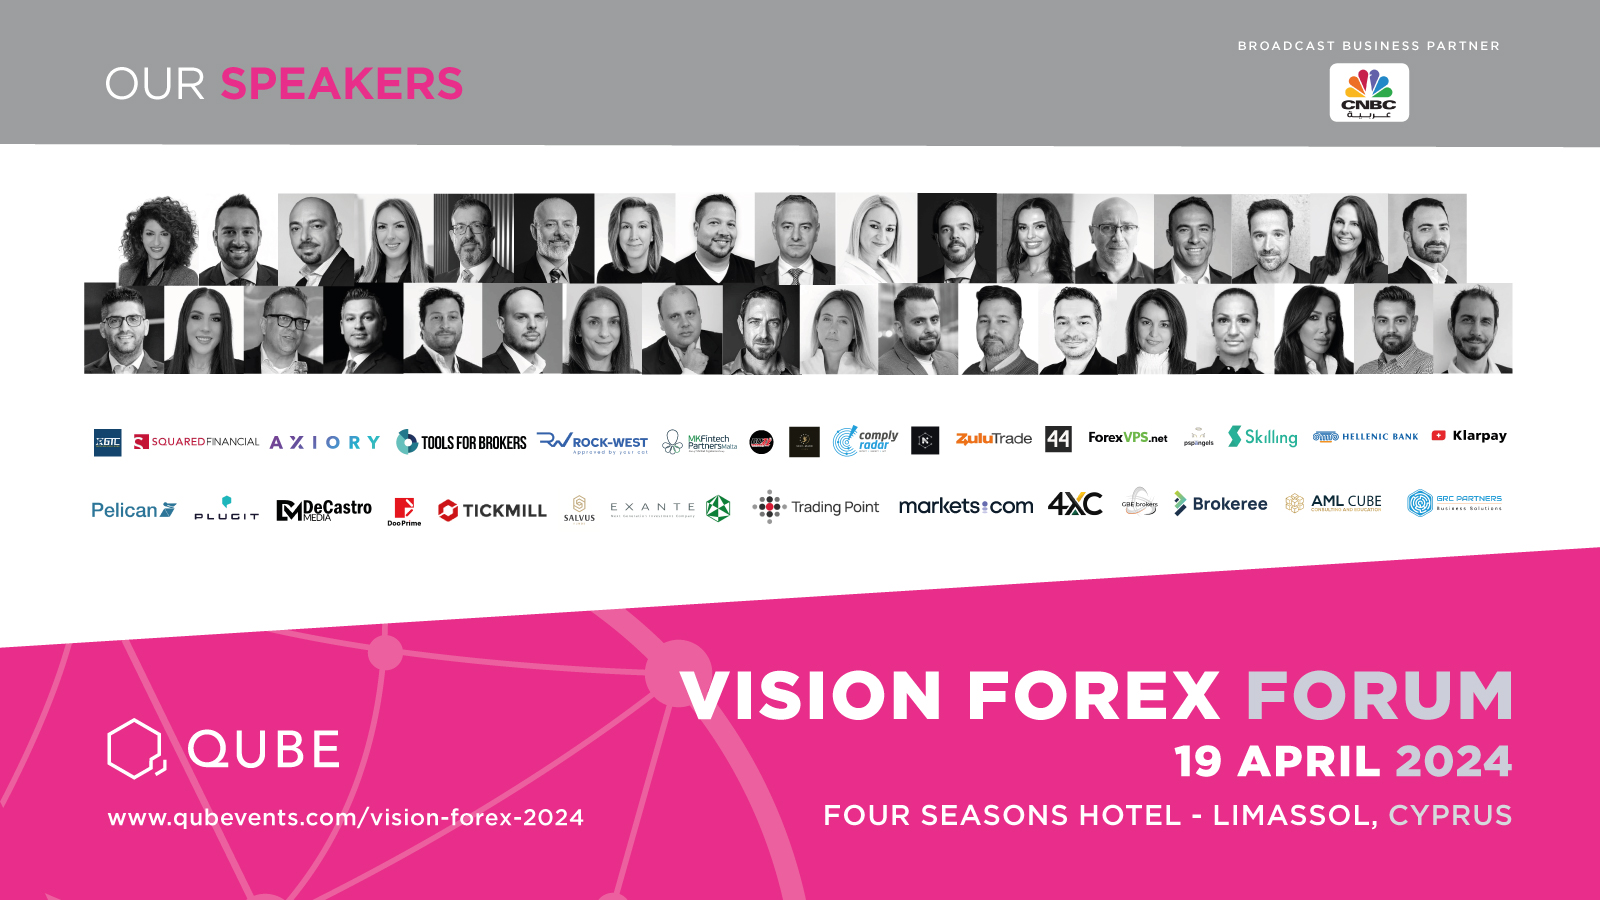 The Vision Forex Forum: A Gathering of Forex Leaders on 19th April 2024 at the Four Seasons Limassol, Cyprus!